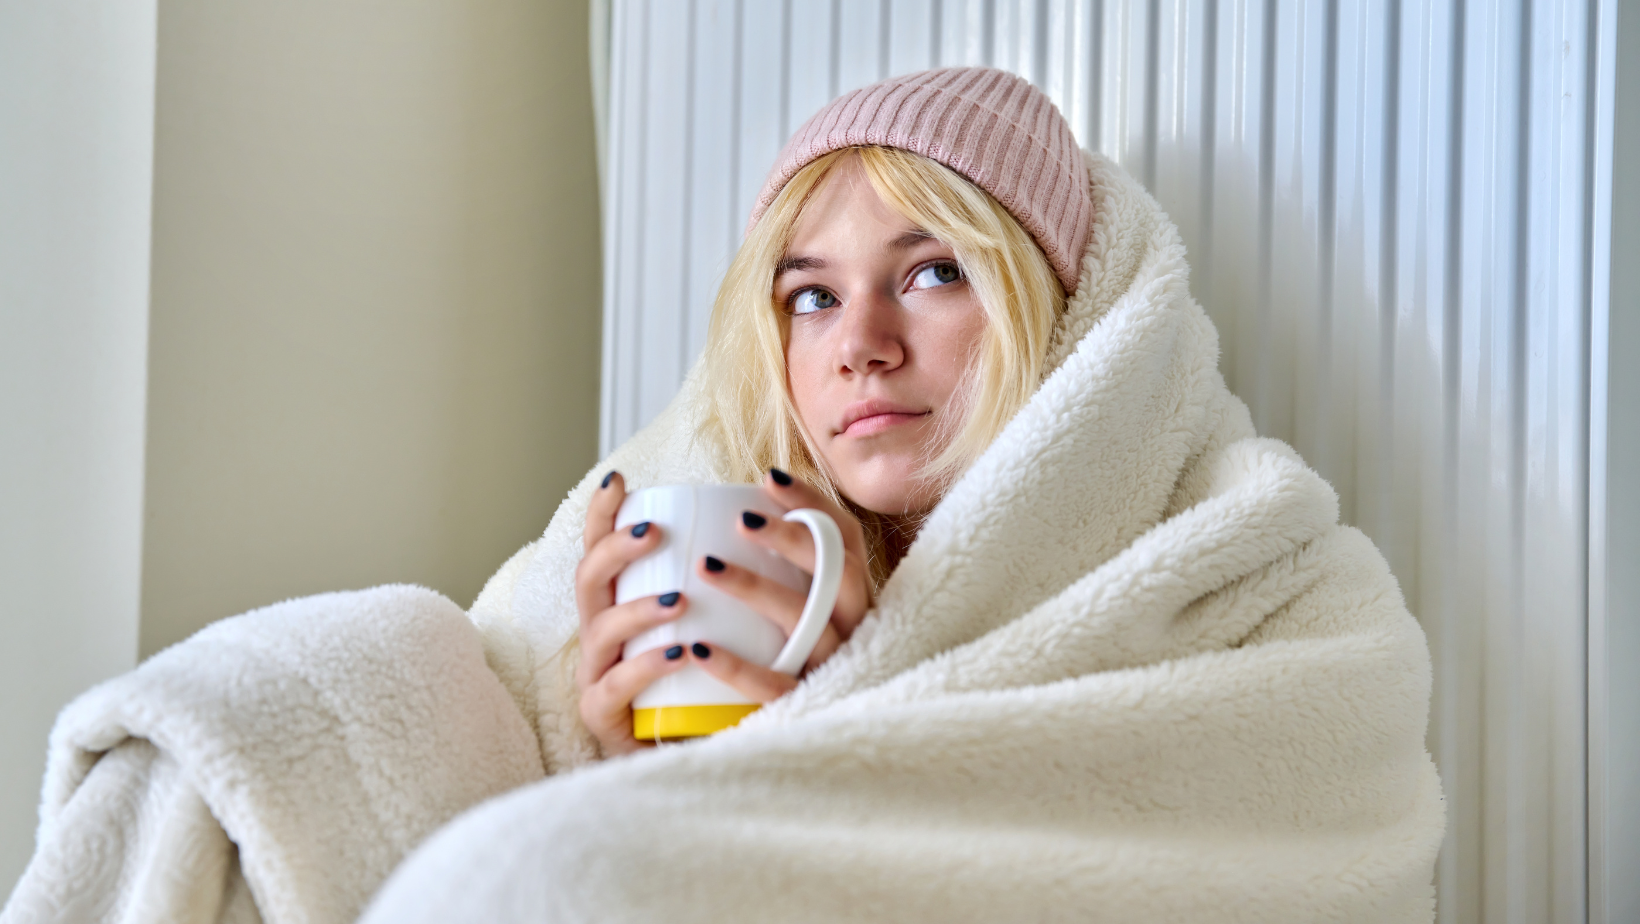 A woman warming herself with a blanket, a beanie, and a cup of coffee.